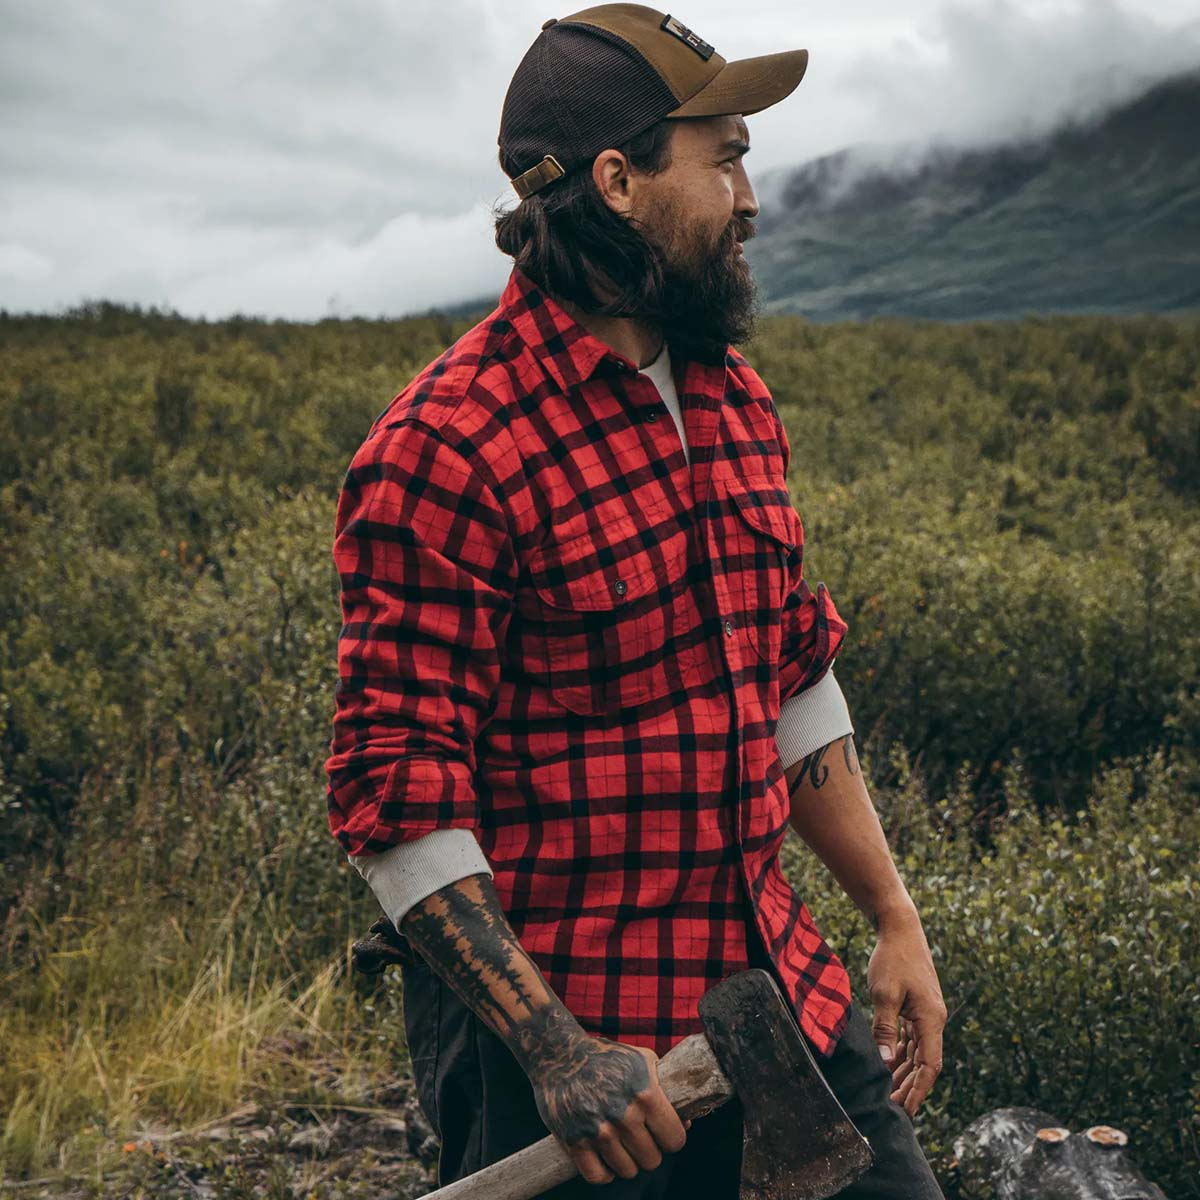 Filson Alaskan Guide Shirt Red Black, this iconic, breathable flannel shirt has a pleated back for freedom of movement